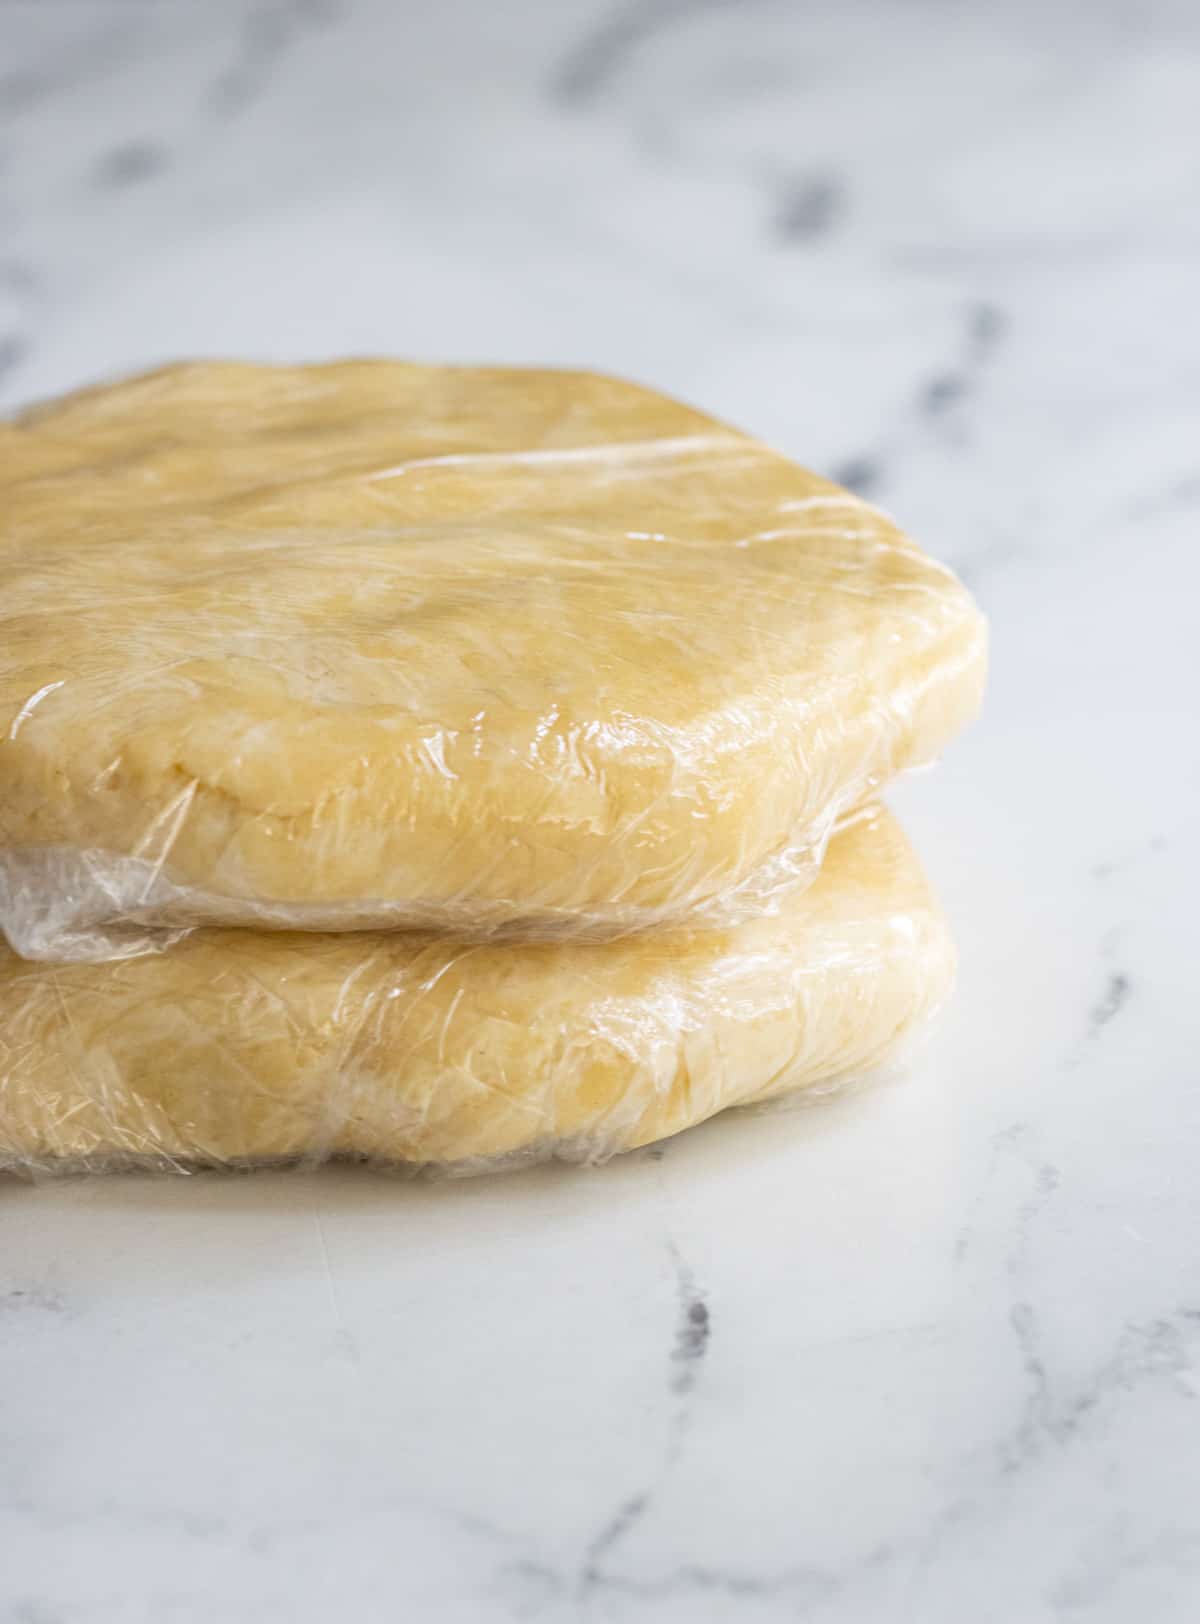 Two pie dough disks each wrapped in plastic.